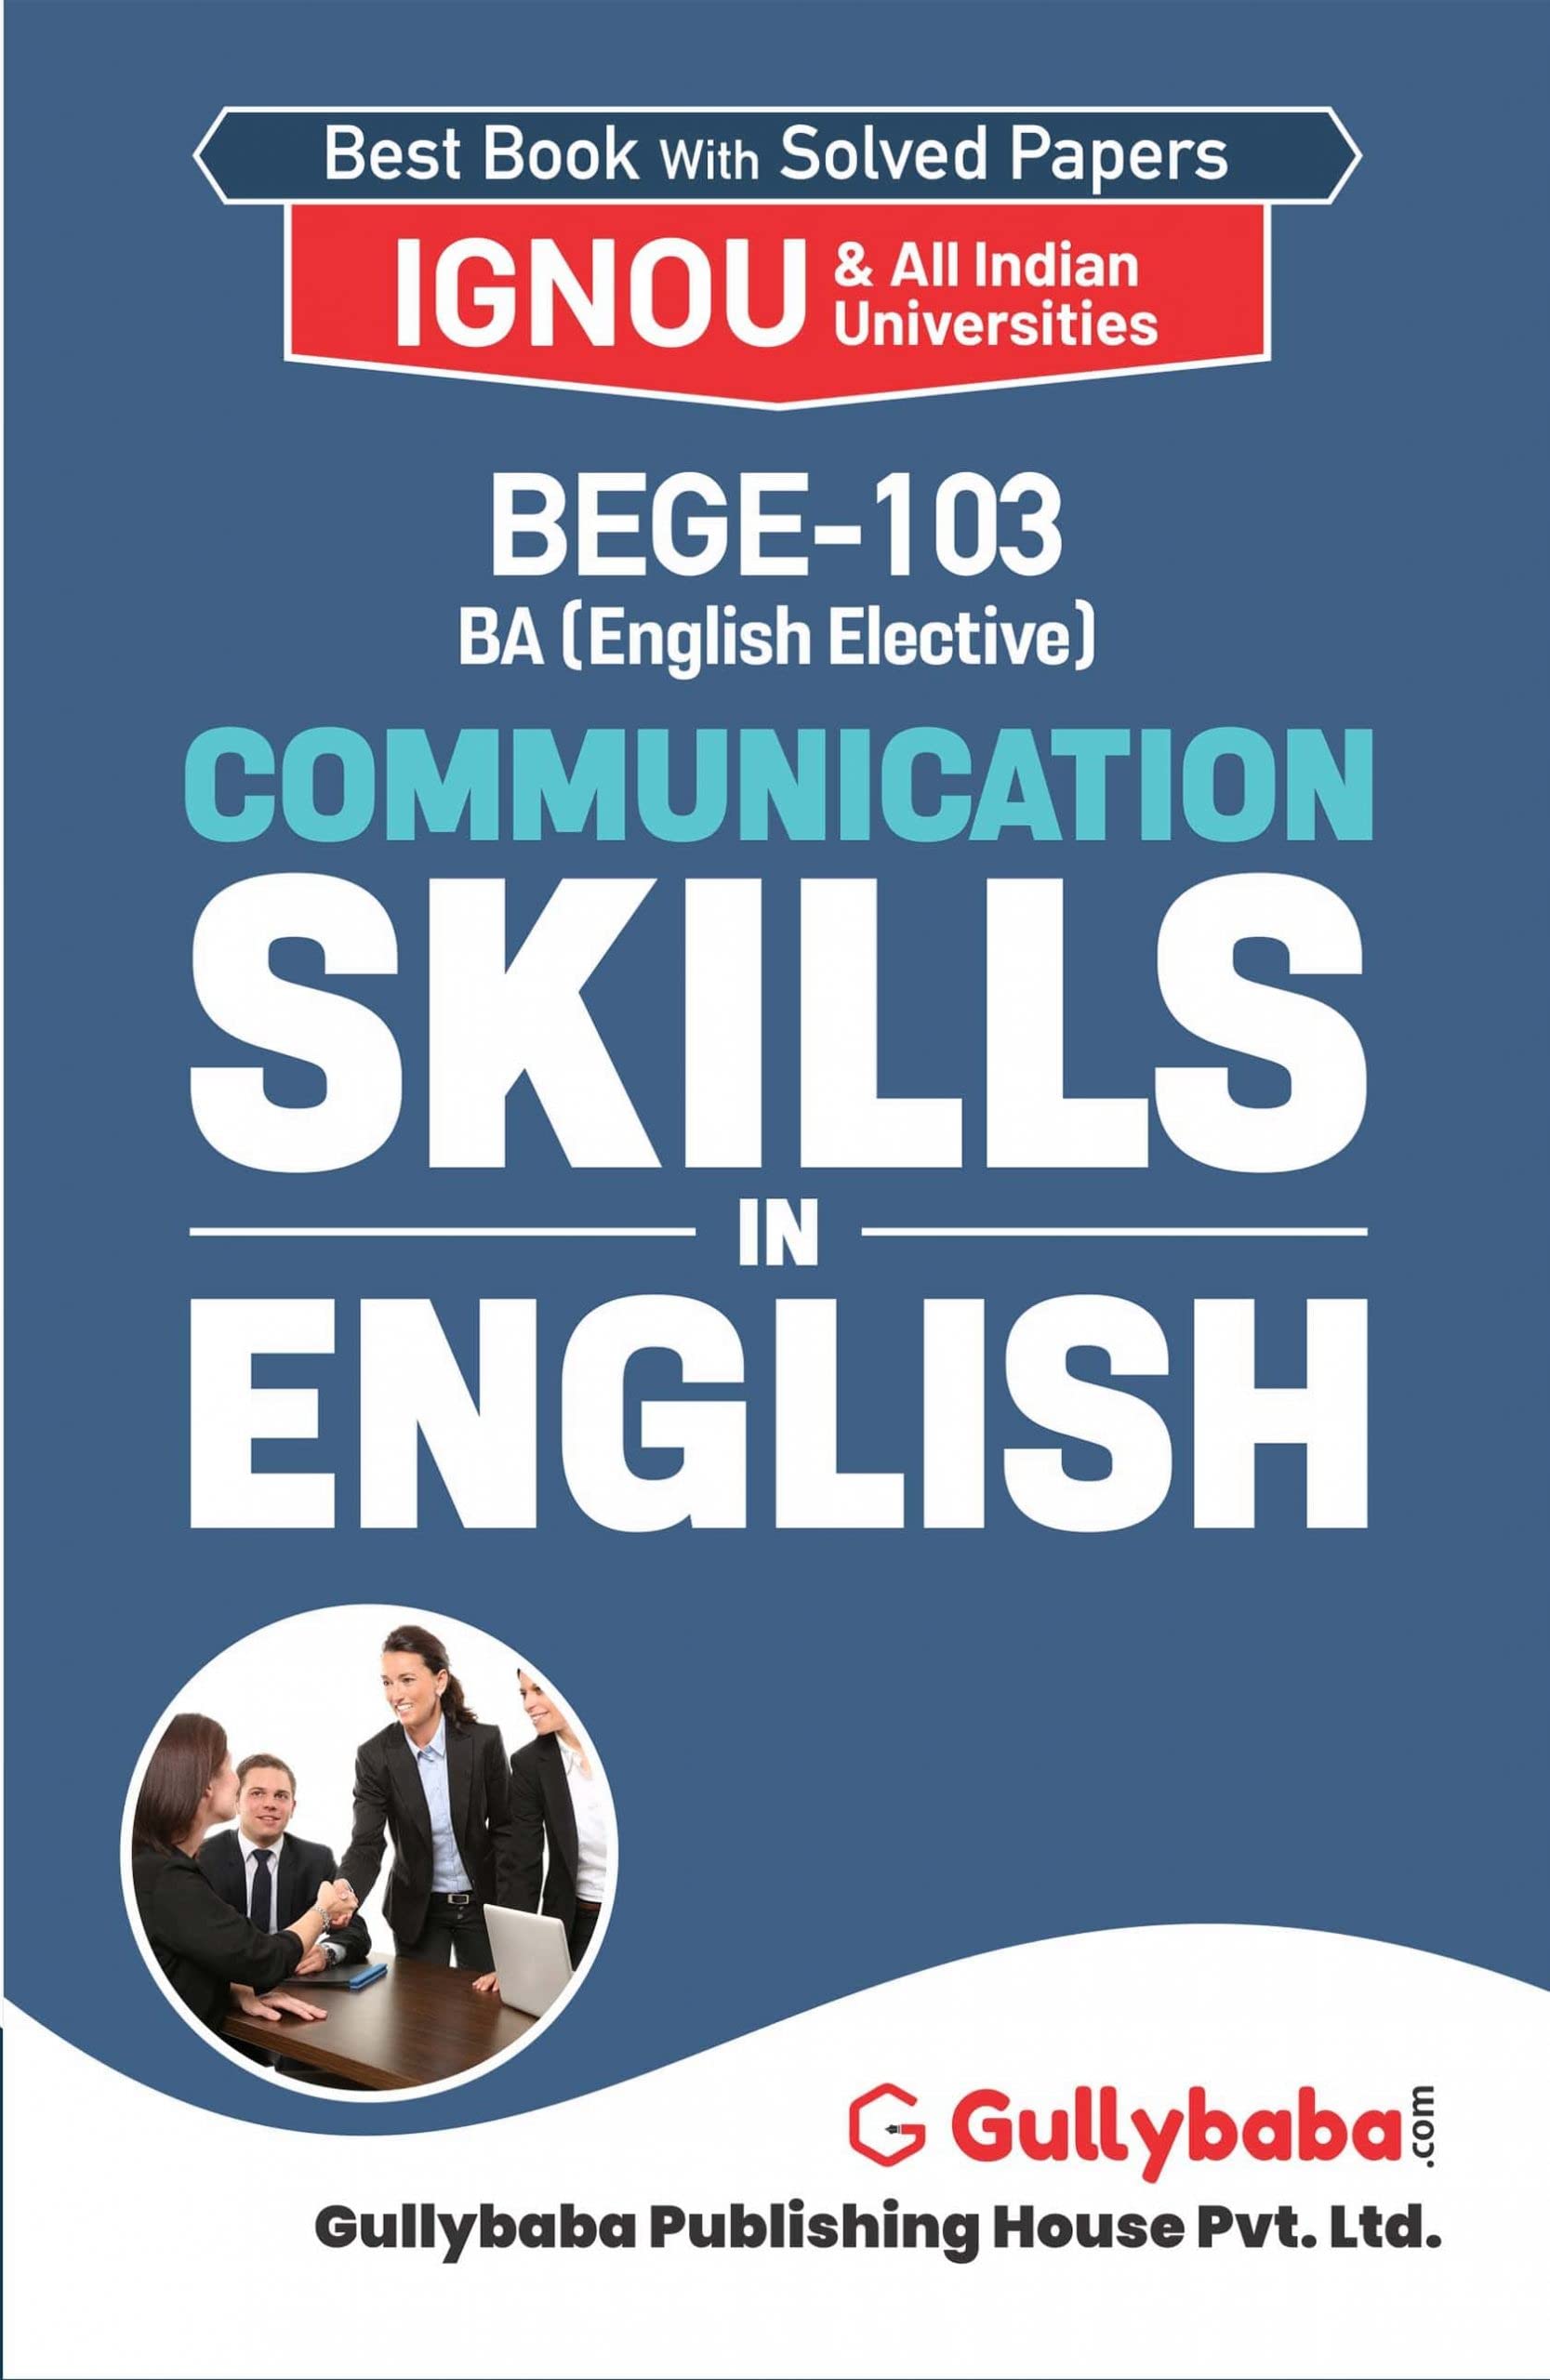 NEW BEGE-103 Communication Skills In English